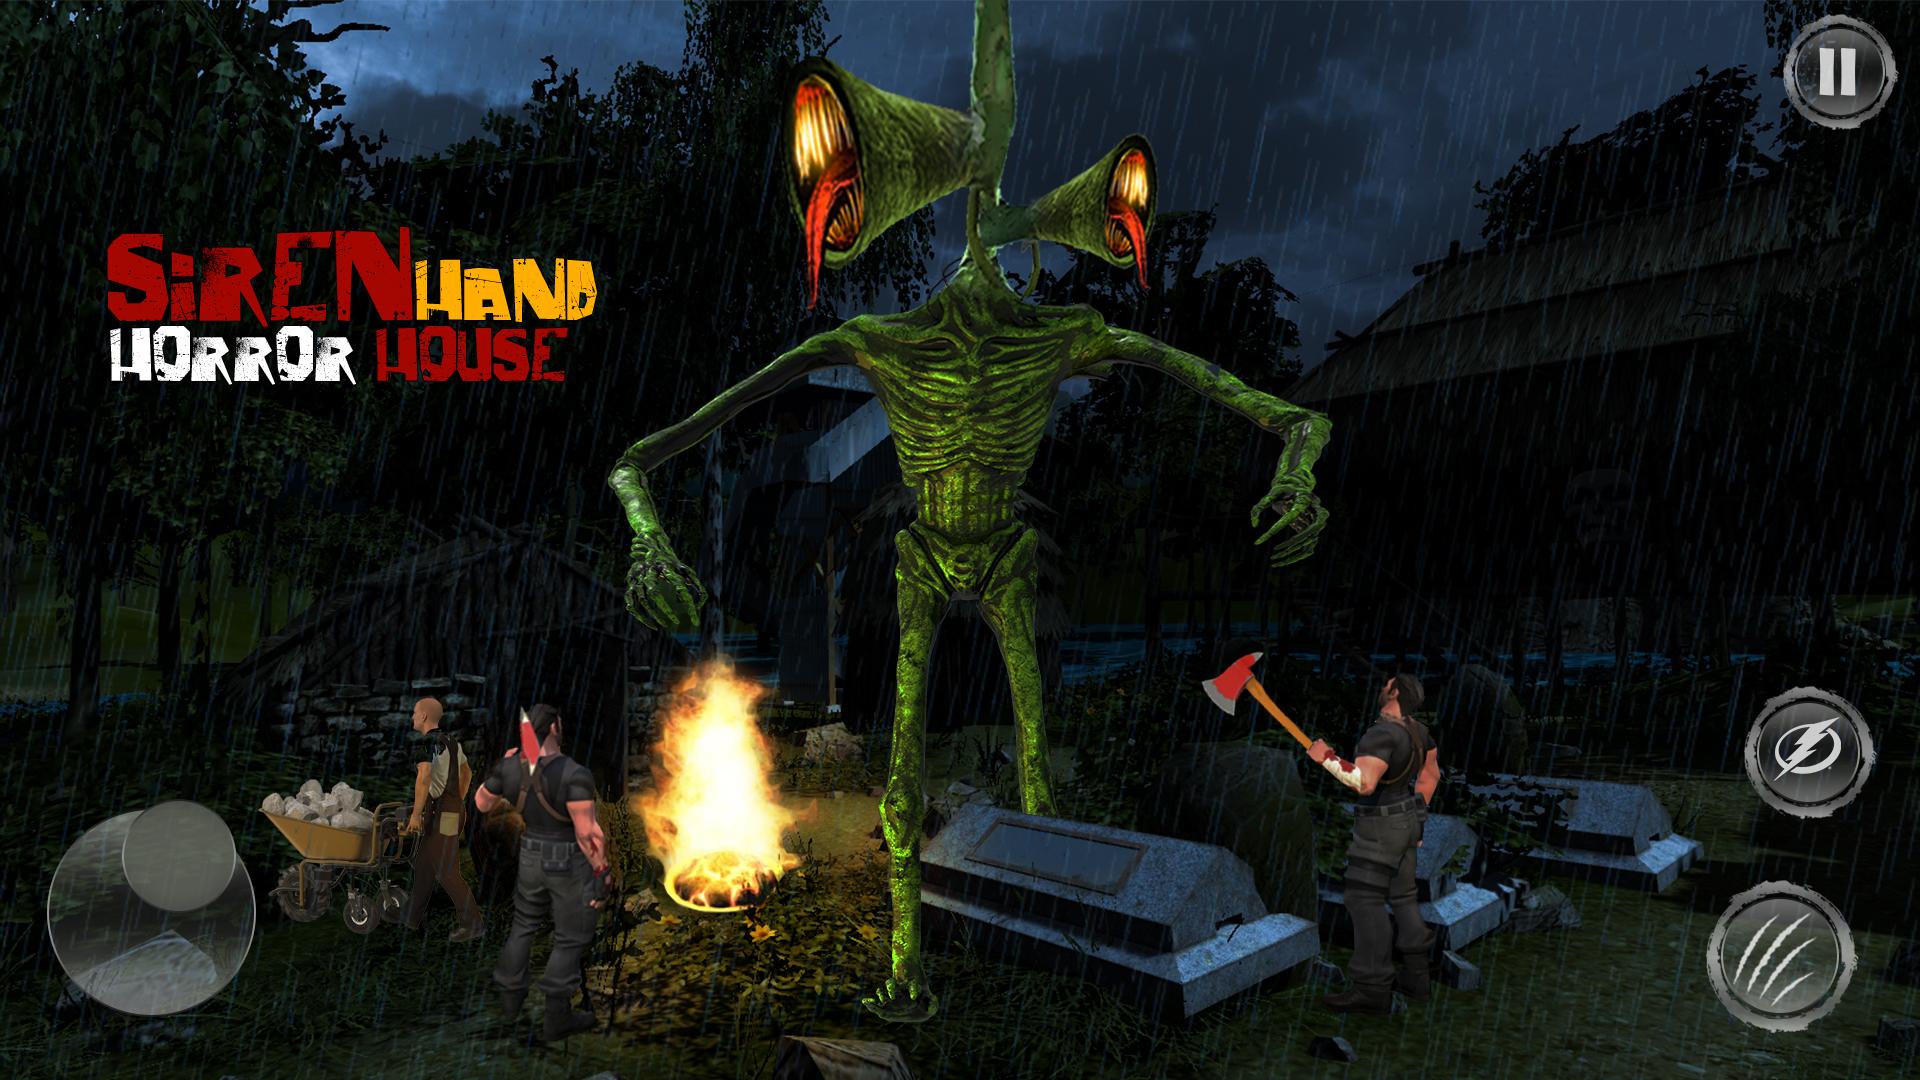 Siren Head Game - Haunted House escape Free Download